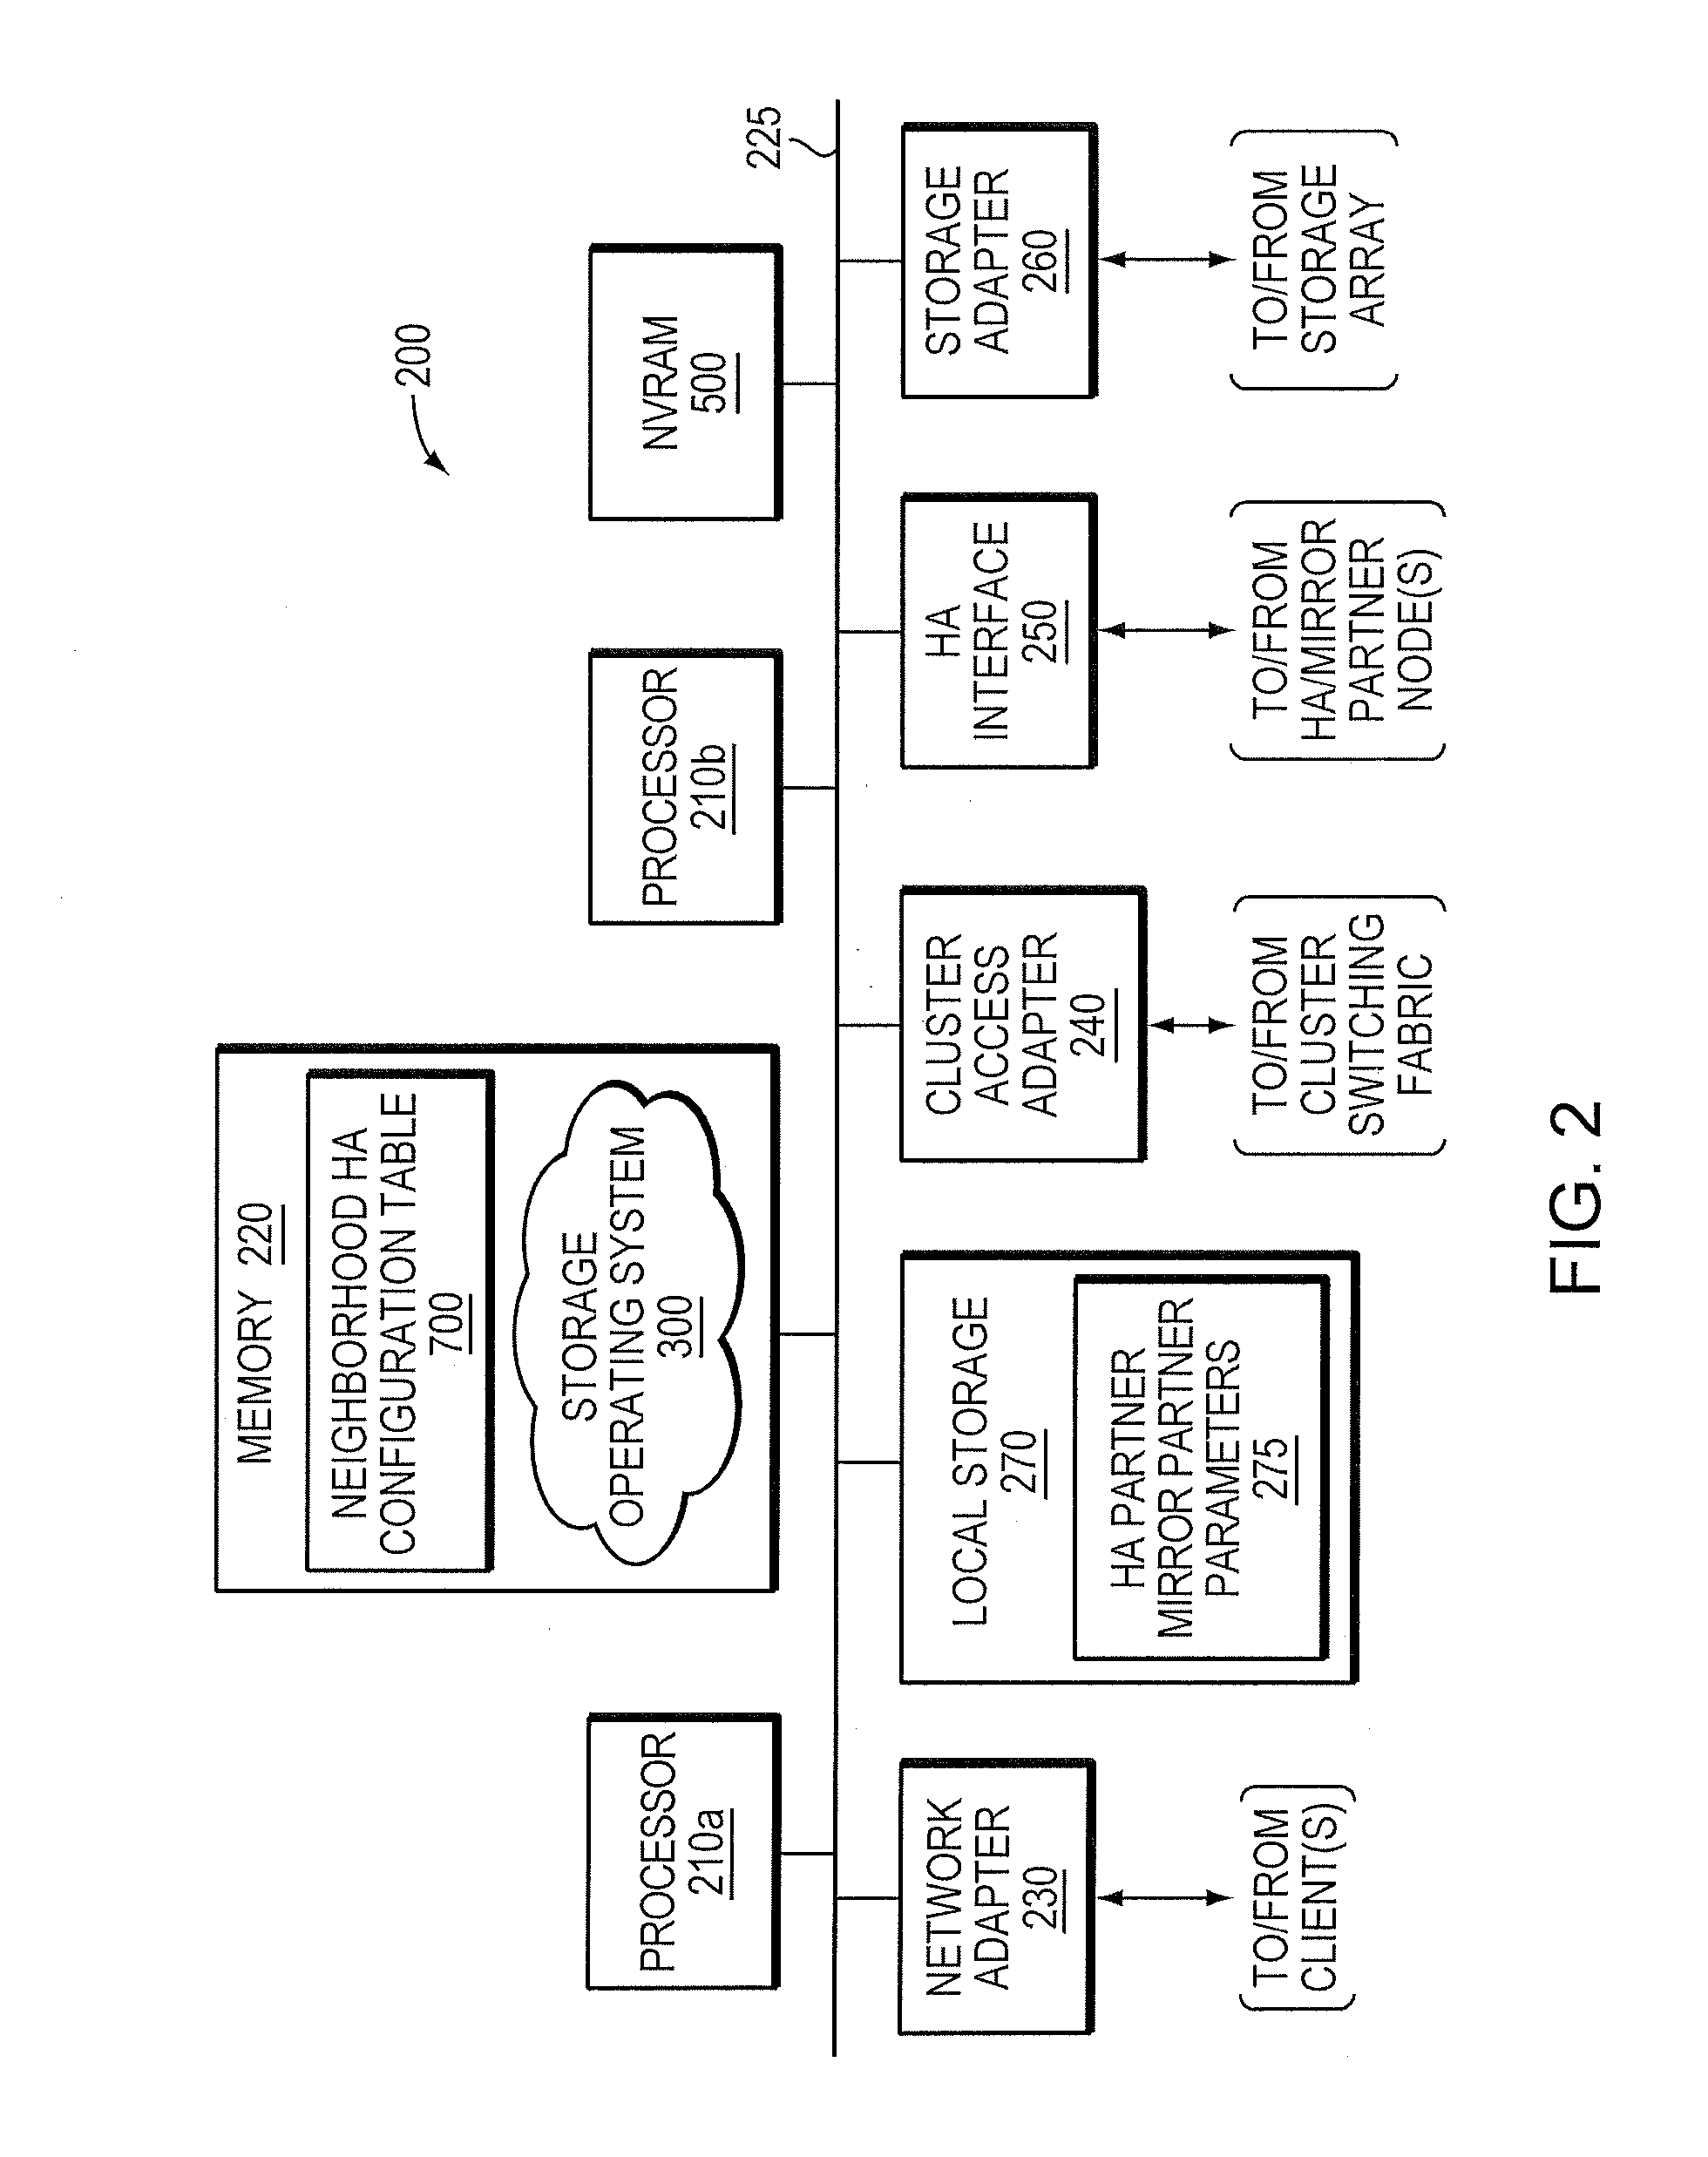 Distributed control protocol for high availability in multi-node storage cluster